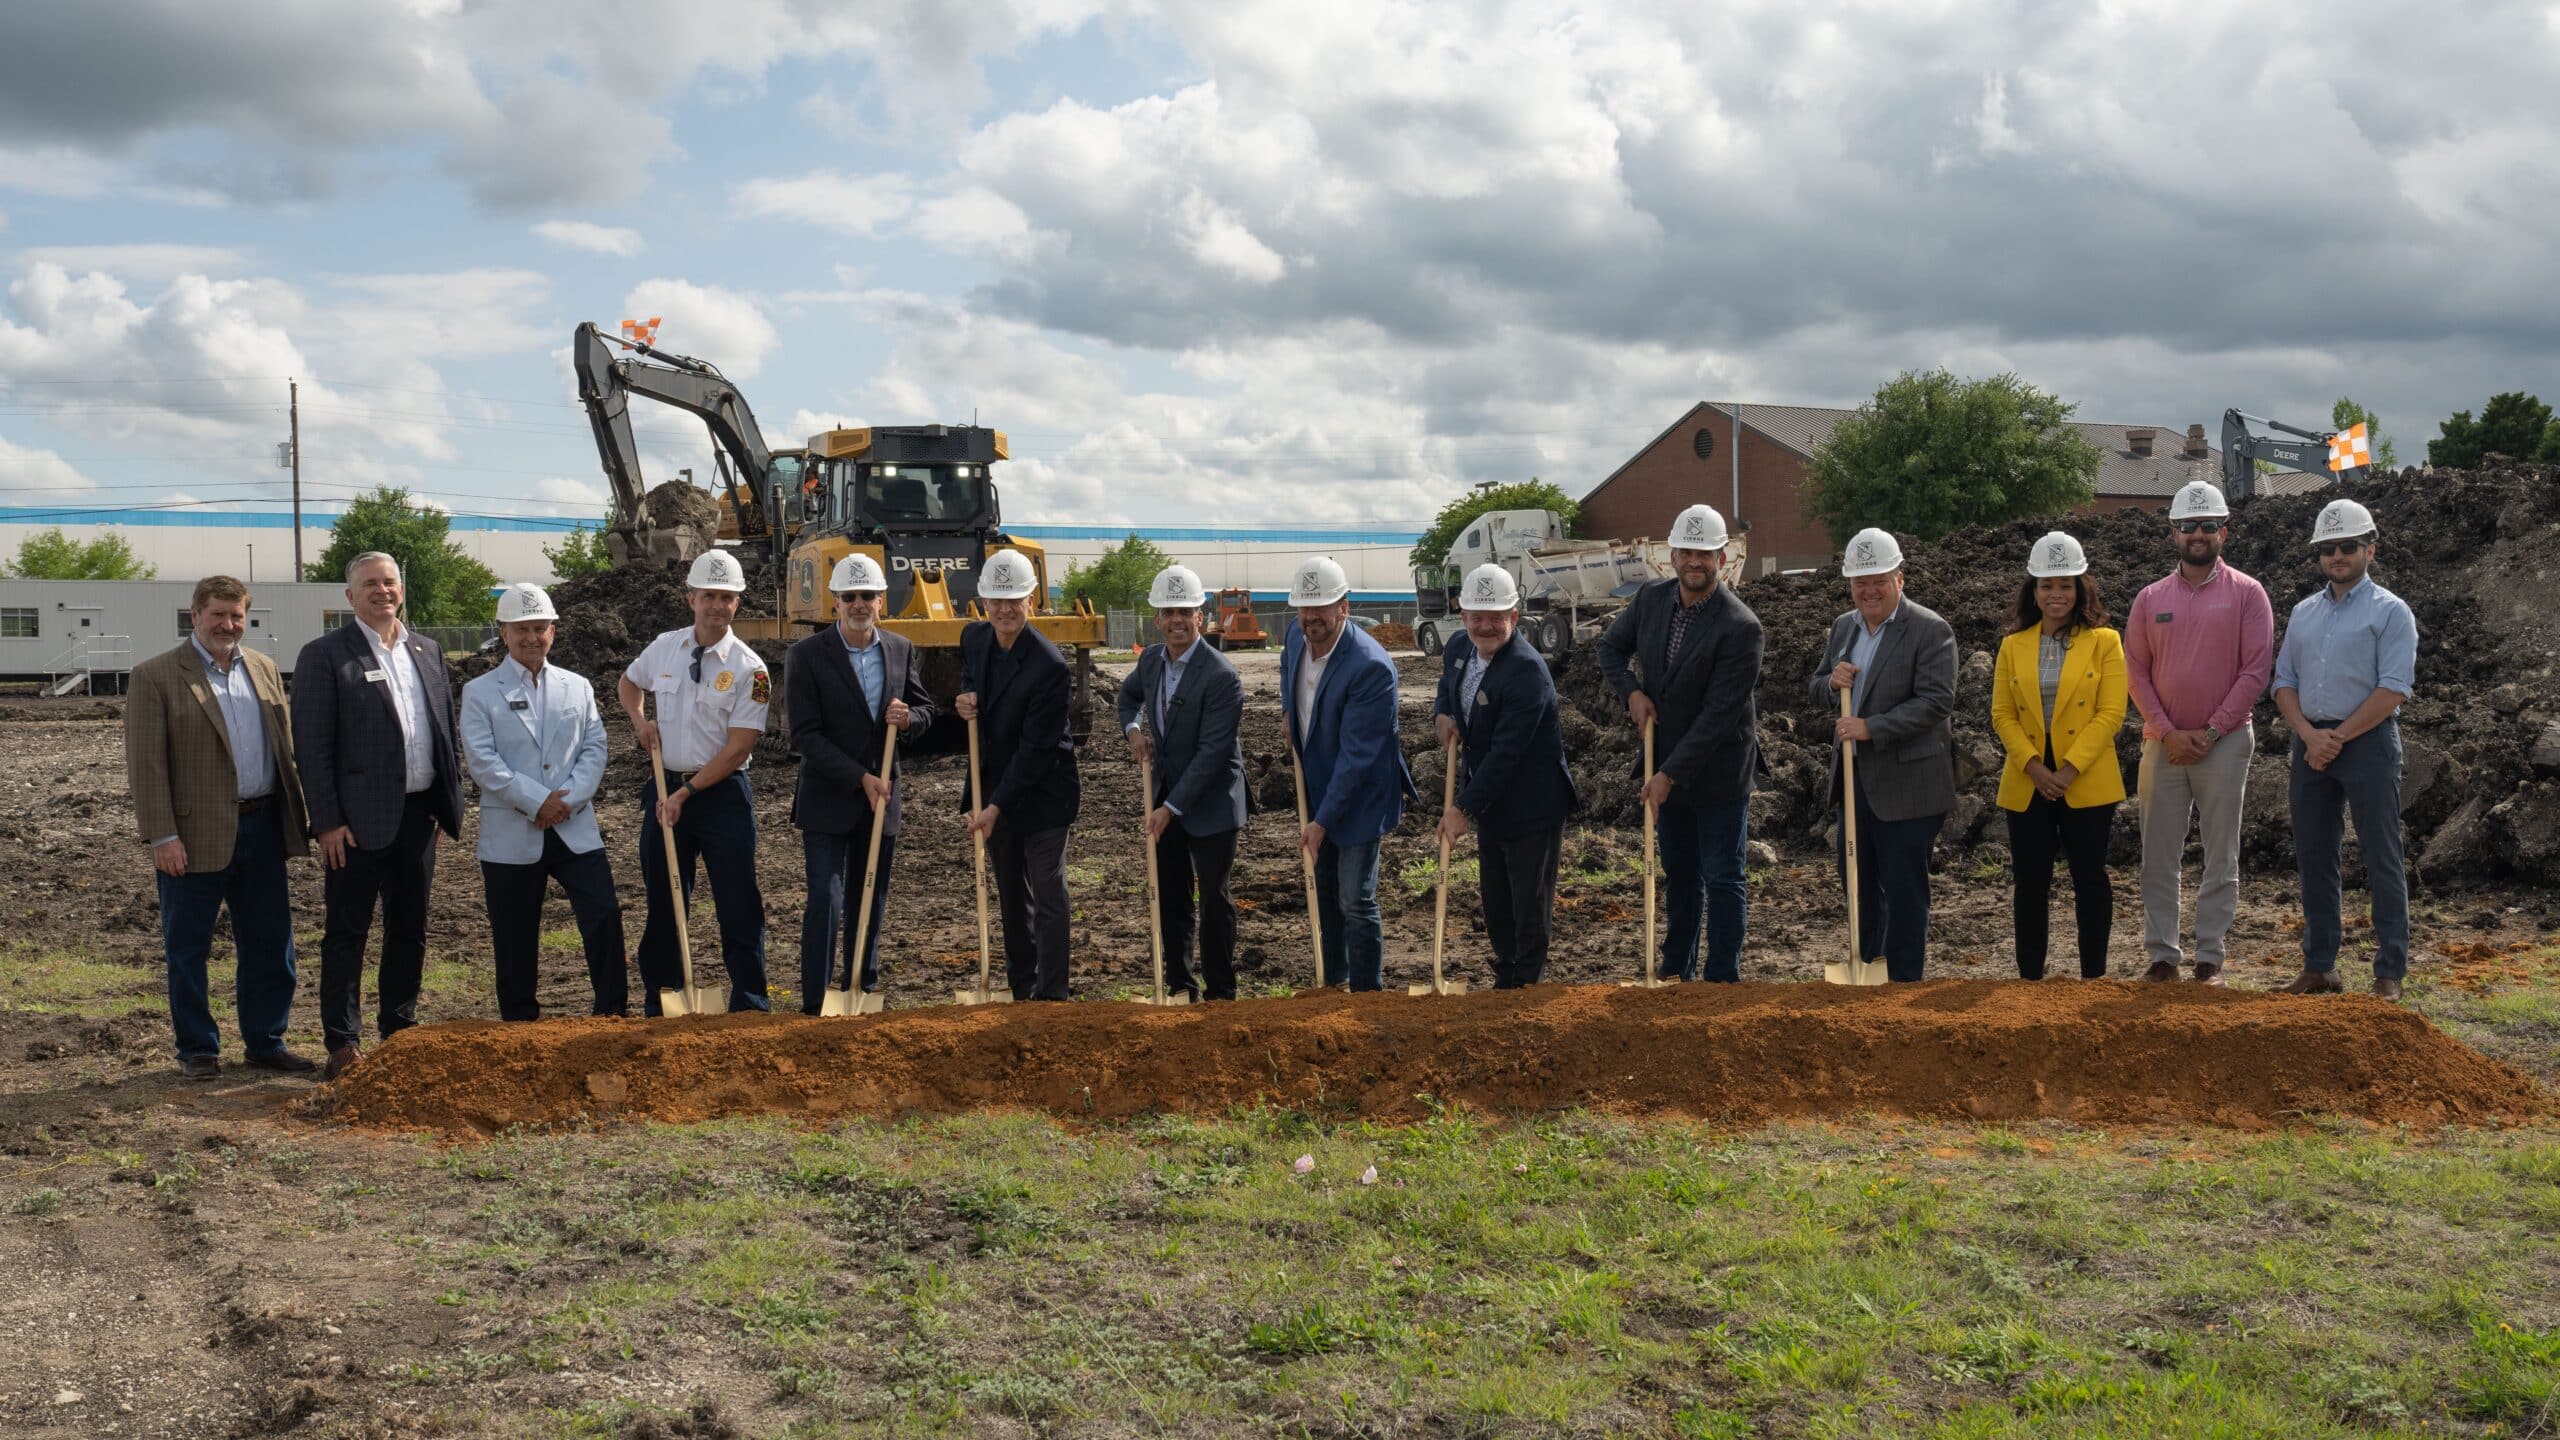 Cirrus Aircraft Breaks Ground on New Facility at McKinney National Airport  